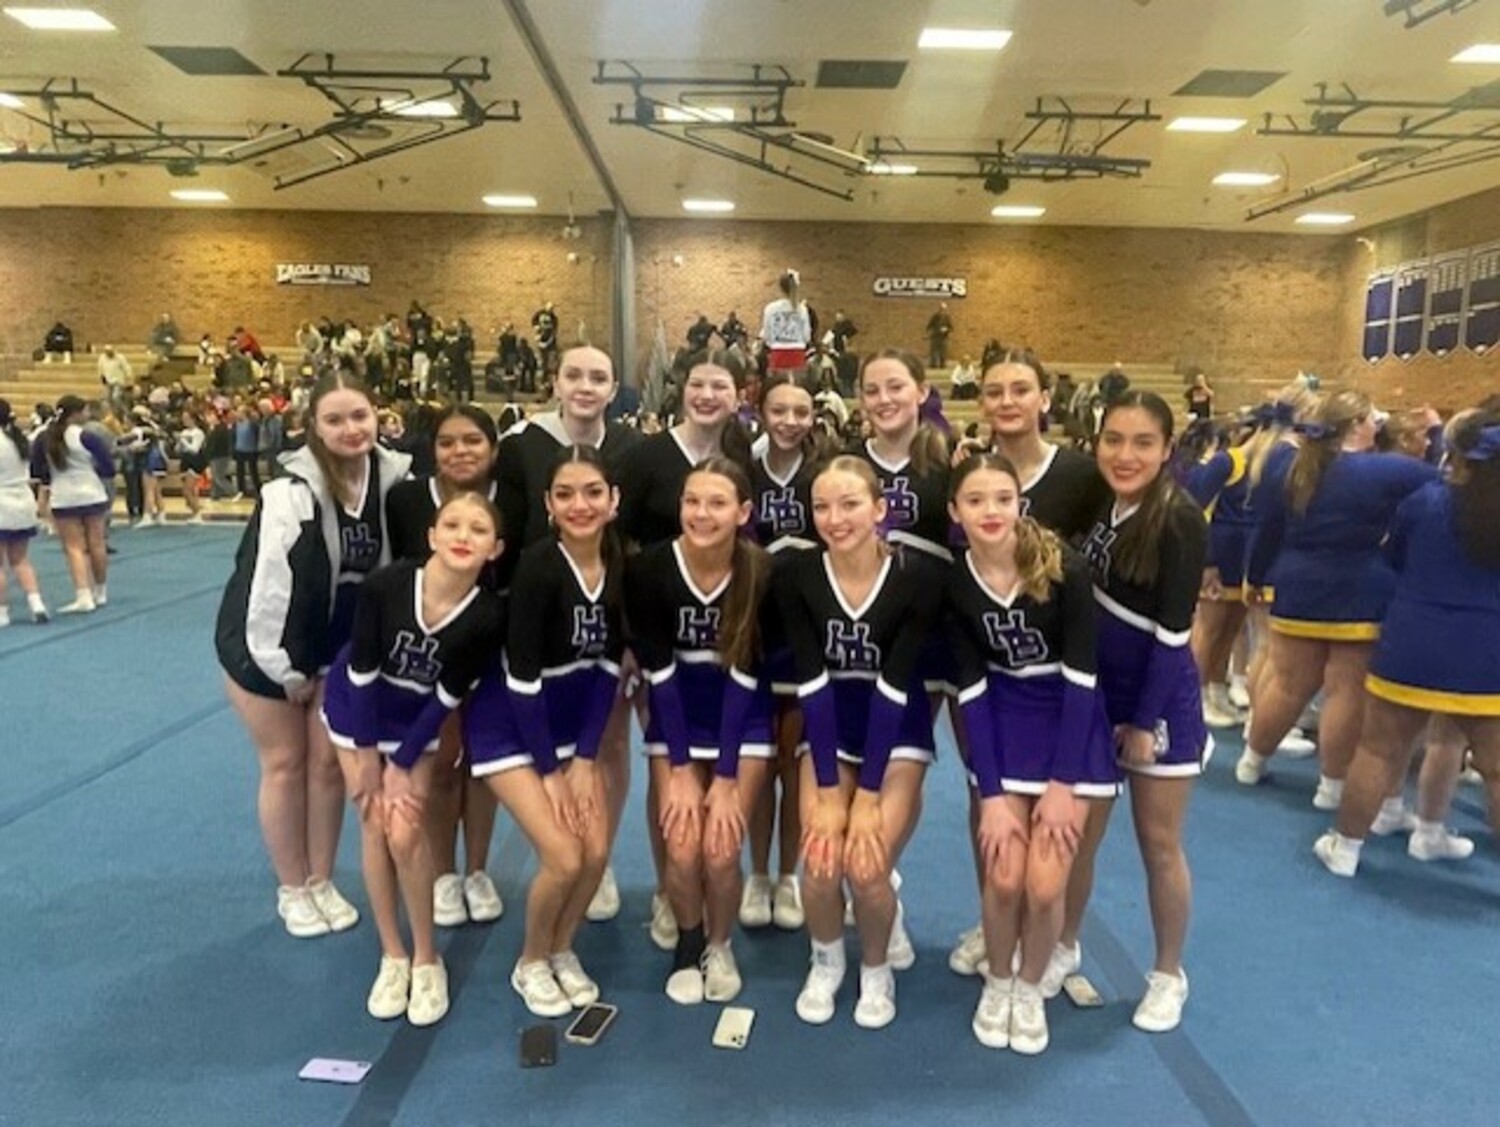 The Hampton Bays High School competitive cheerleading team will compete in the Suffolk County Championship on February 17. COURTESY HAMPTON BAYS SCHOOL DISTRICT